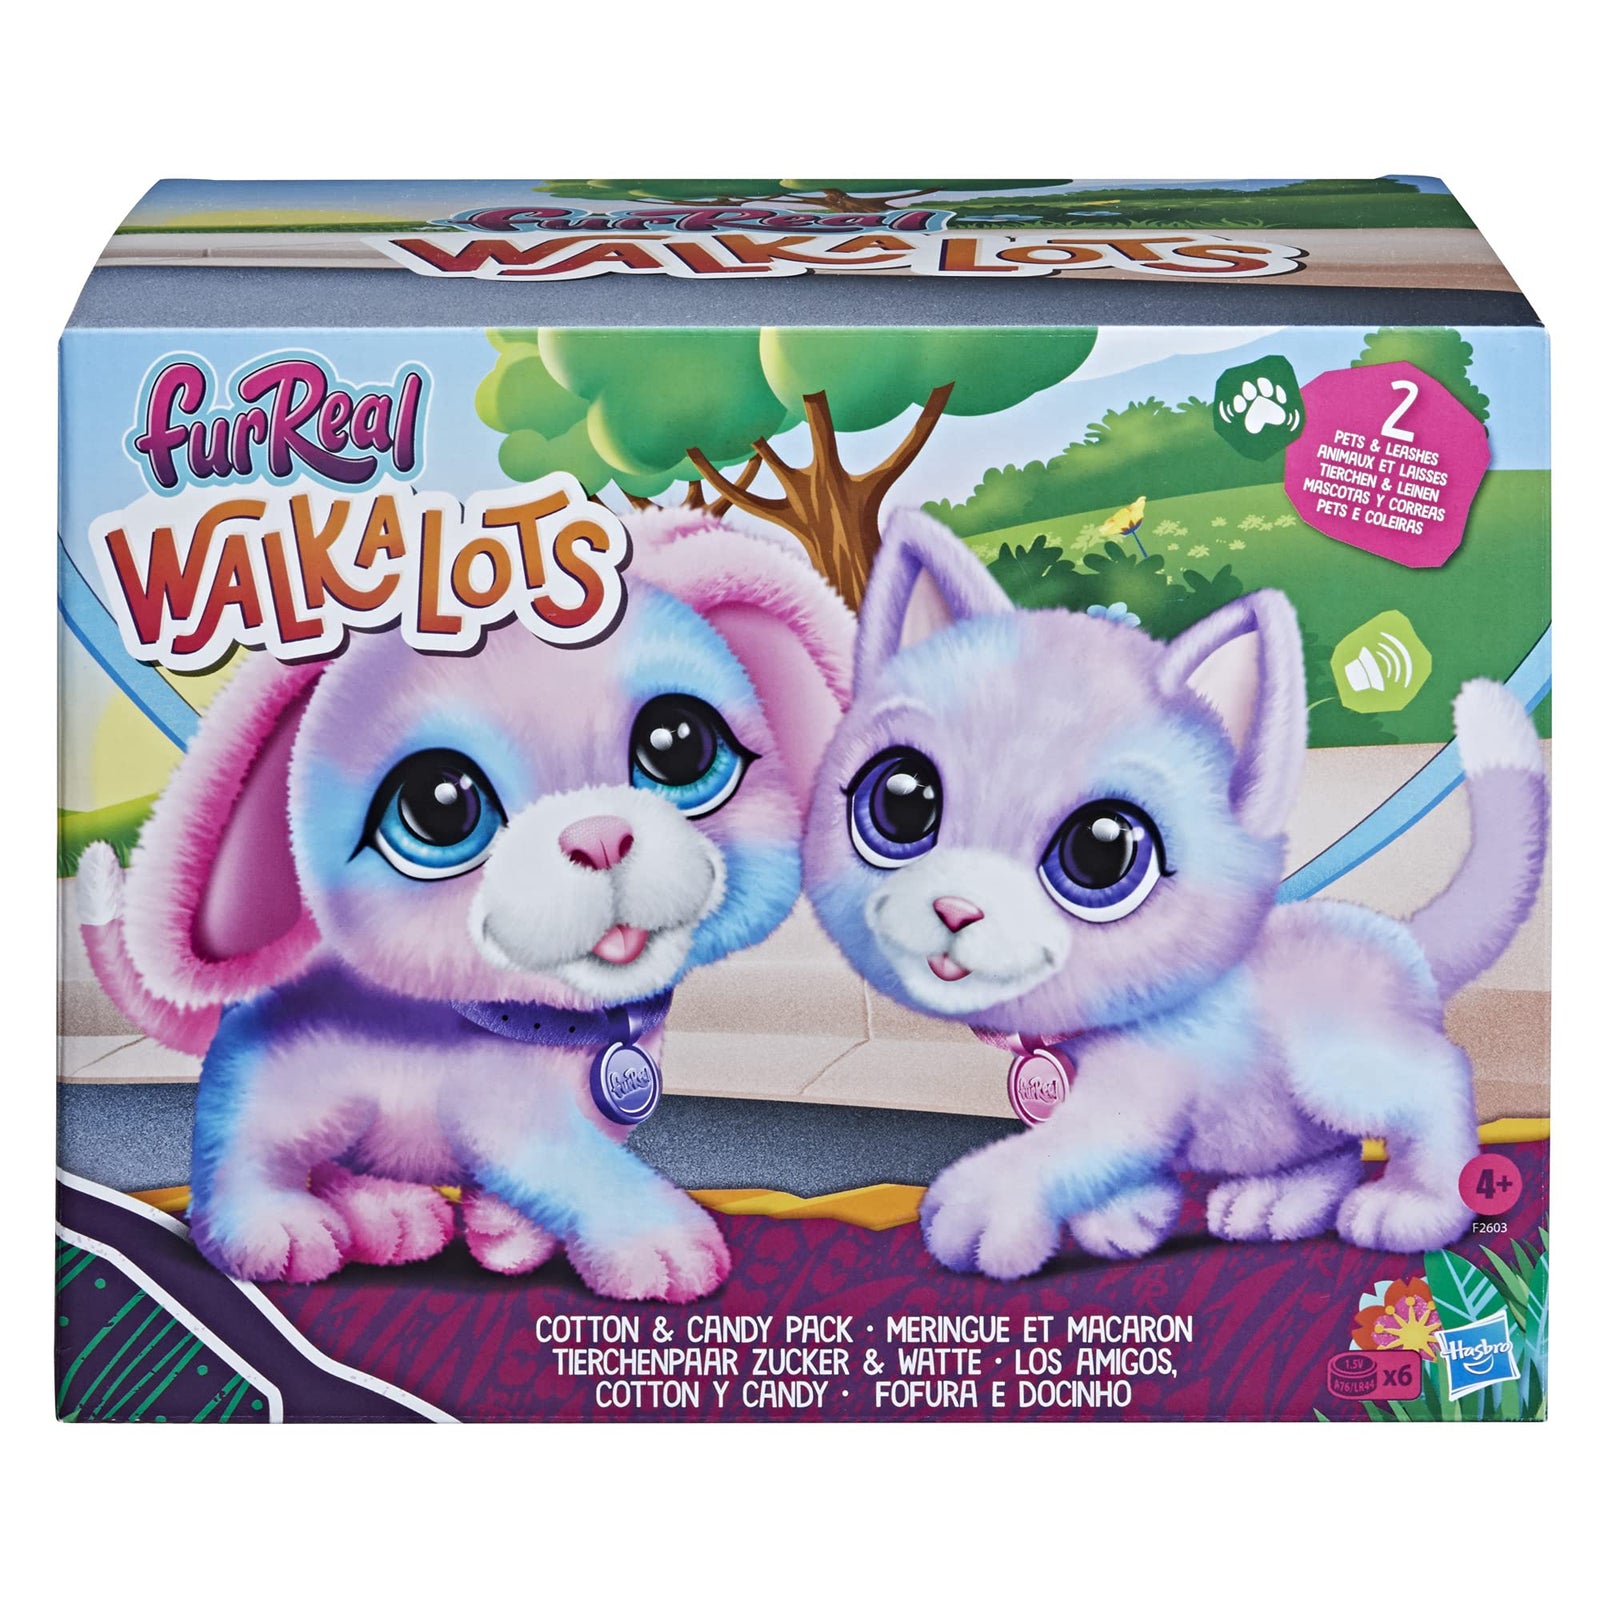 FurReal Walkalots Cotton and Candy 2-Pack Toy, Interactive Electronic Puppy and Kitty Pets, Ages 4 and up (Amazon Exclusive)